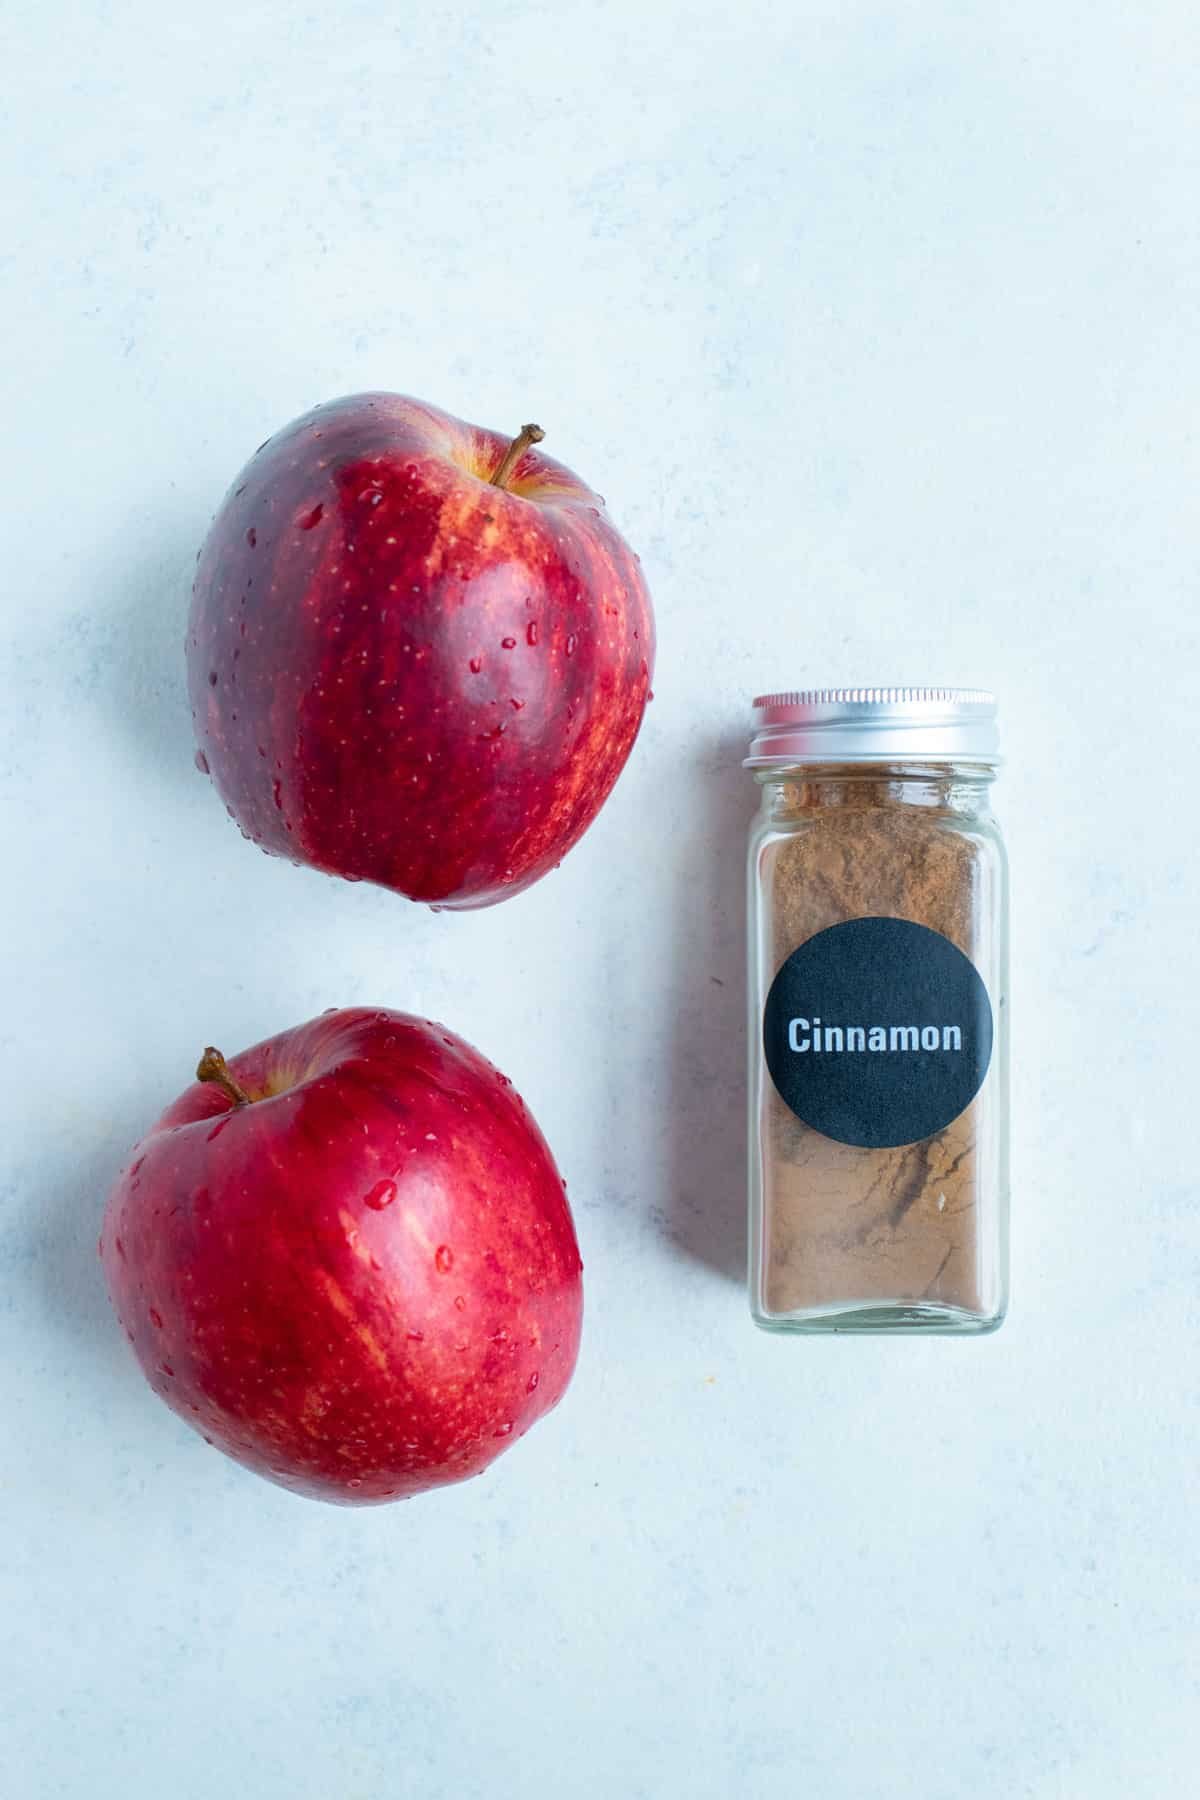 Apples and cinnamon are the ingredients used for this simple recipe.